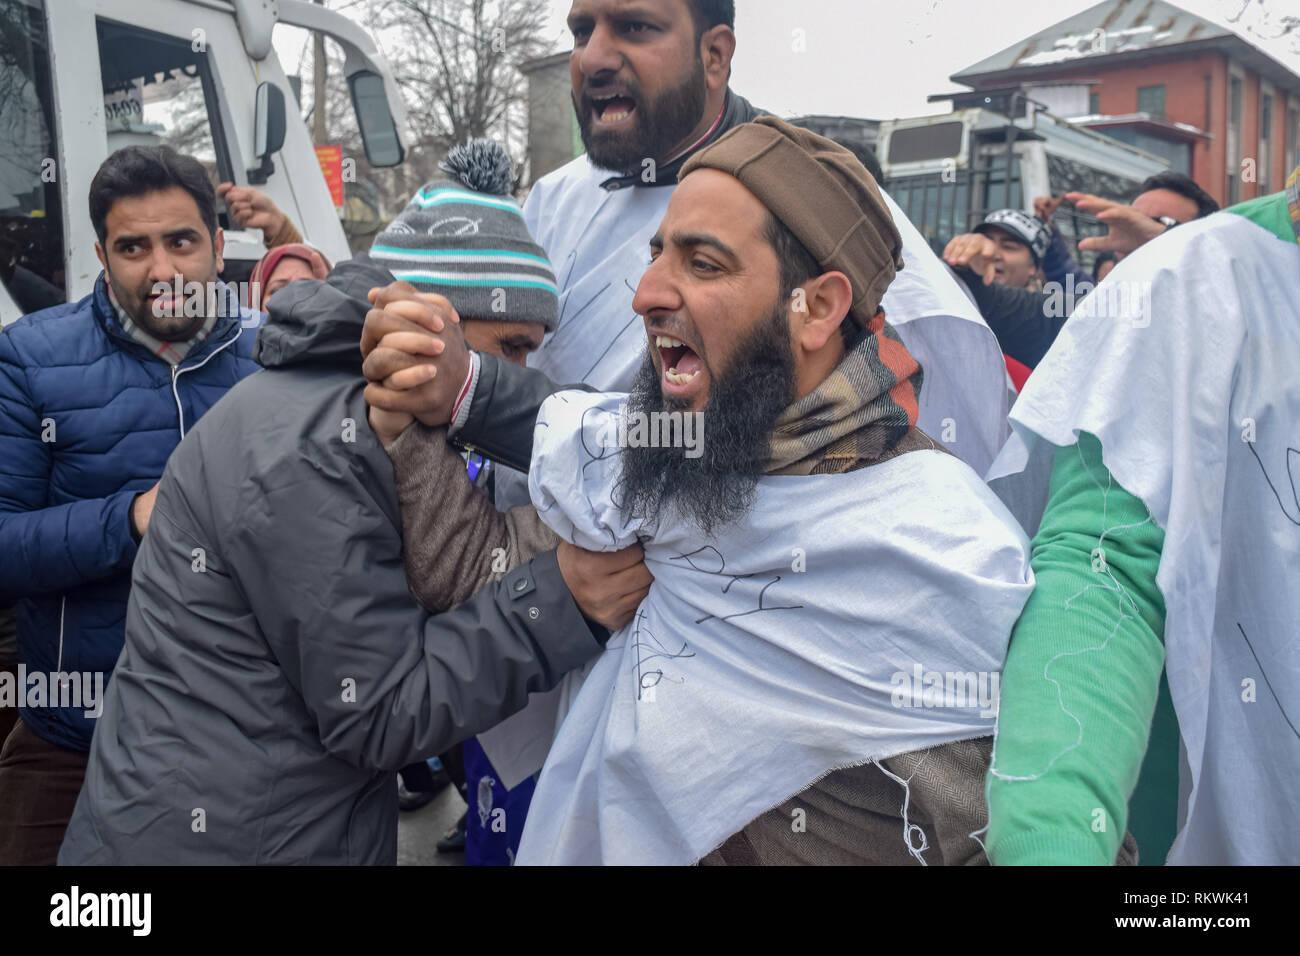 February 12, 2019 - Srinagar, Jammu & Kashmir - A member of Jammu and Kashmir police in civvies seen detaining a member of NHM employees during the Protest in Srinagar.NHM (National Health Mission) employees on took out an anti-government protest march towards the Raj Bhavan in Srinagar. The employees who have been on a strike since the past thirty days are demanding regularization in a phased manner, equal pay for equal work and other social security benefits. Police used batons on the Protesters and many of them were detained during the protest. (Credit Image: © Idrees Abbas/SOPA Ima Stock Photo